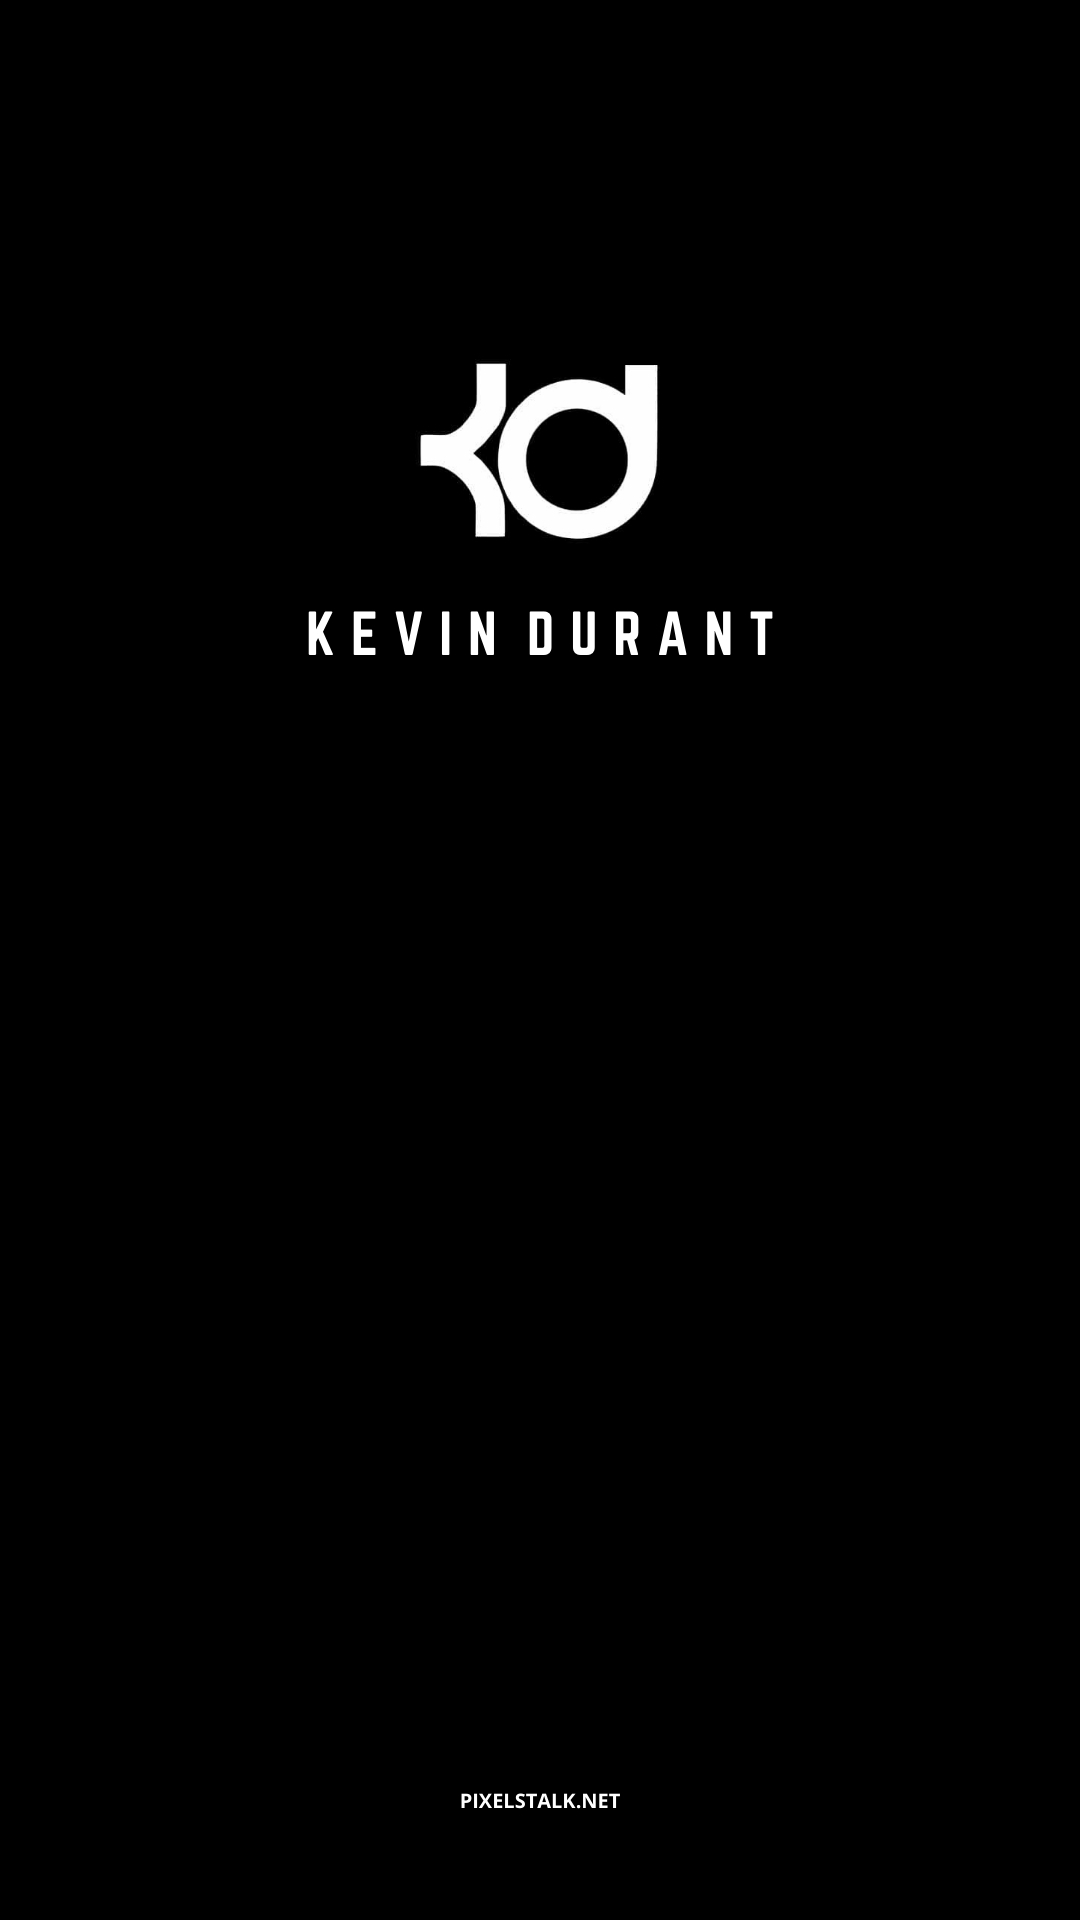 200+] Kevin Durant Wallpapers | Wallpapers.com